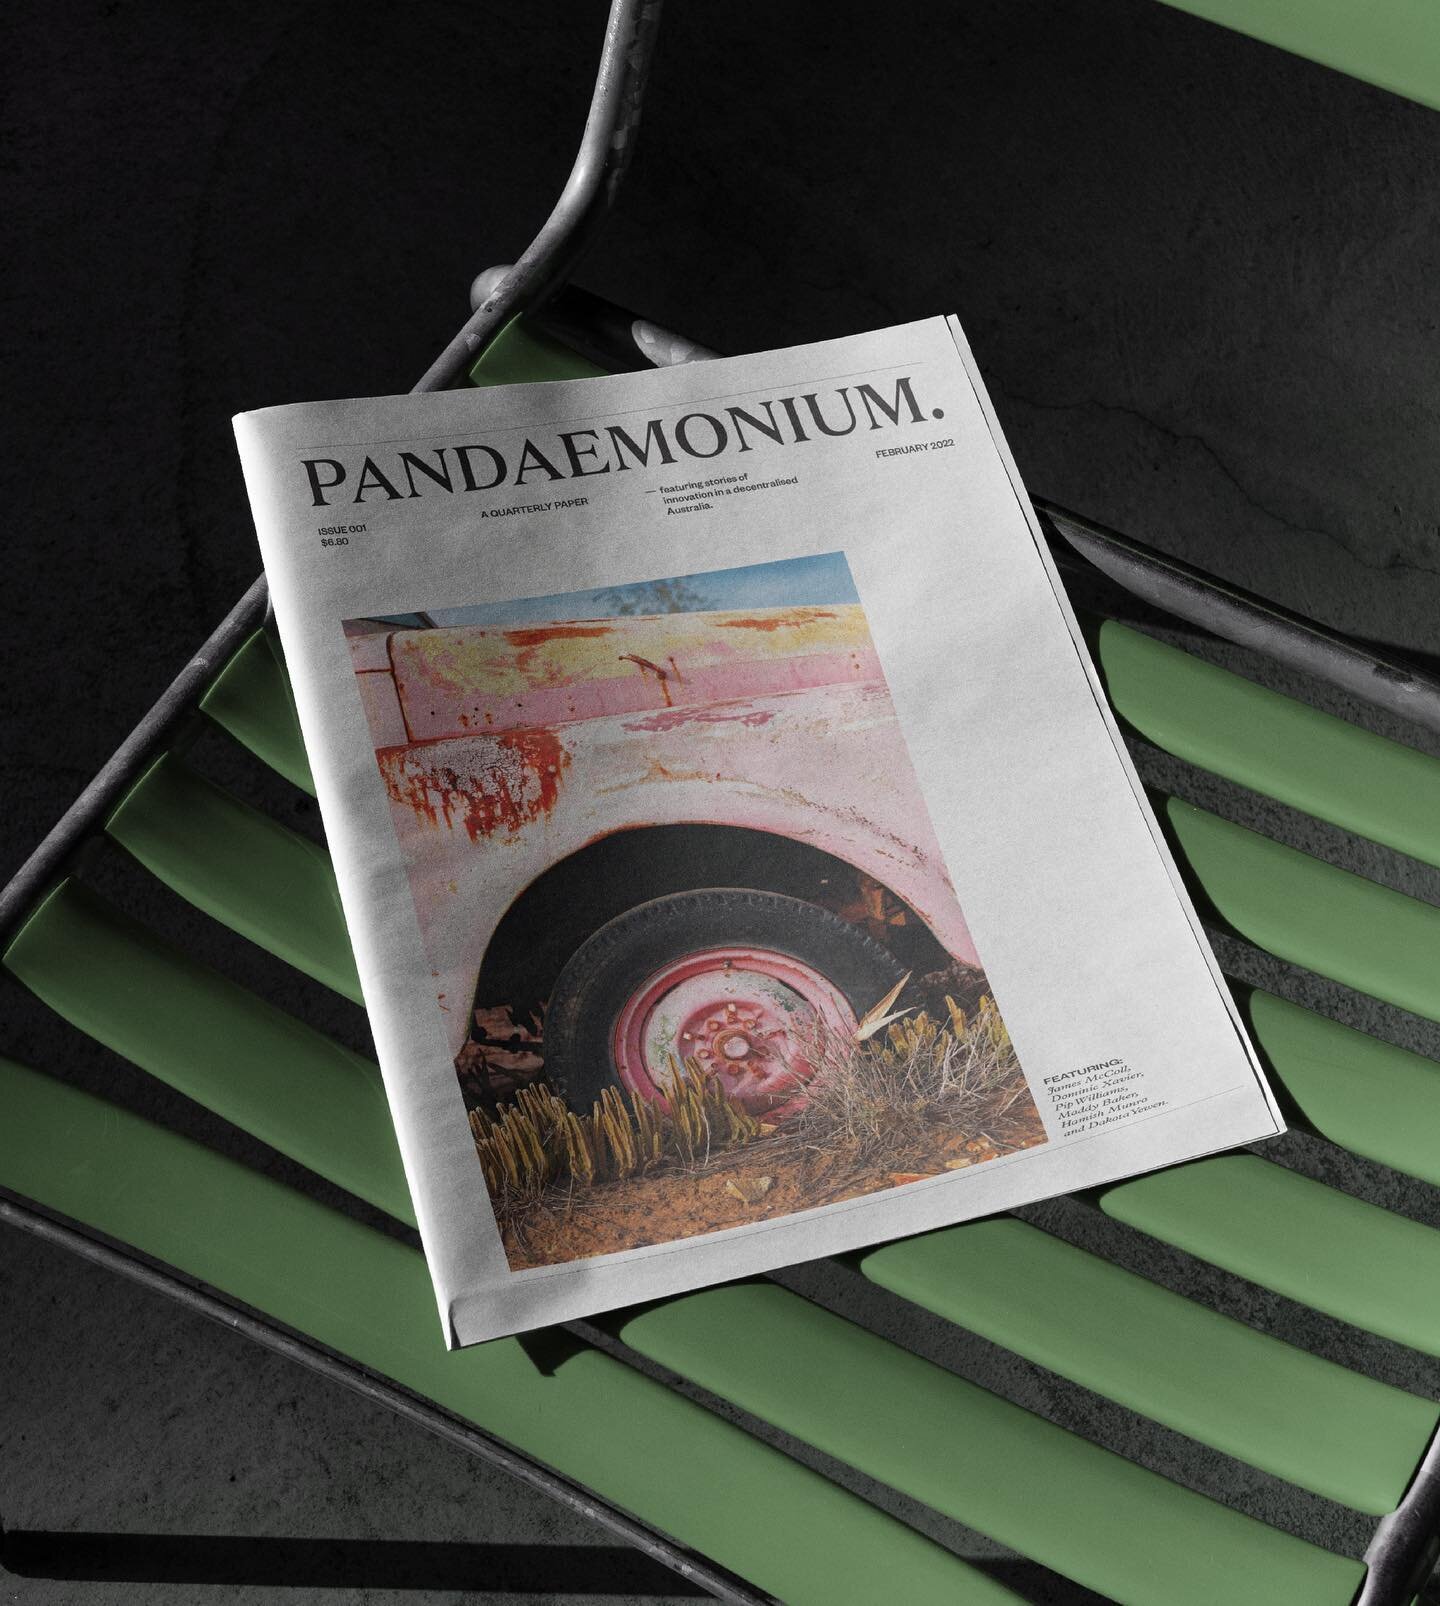 In anticipation for @p.andaemonium Issue 02, here is a look back at where it started &hellip; 

Pandaemonium&nbsp;Paper
+ Issue 001

Quarterly Tabloid Newsprint&nbsp;
40pp+
Publication Development &amp; Design
Masthead/Brand Design
Editorial Layout
P